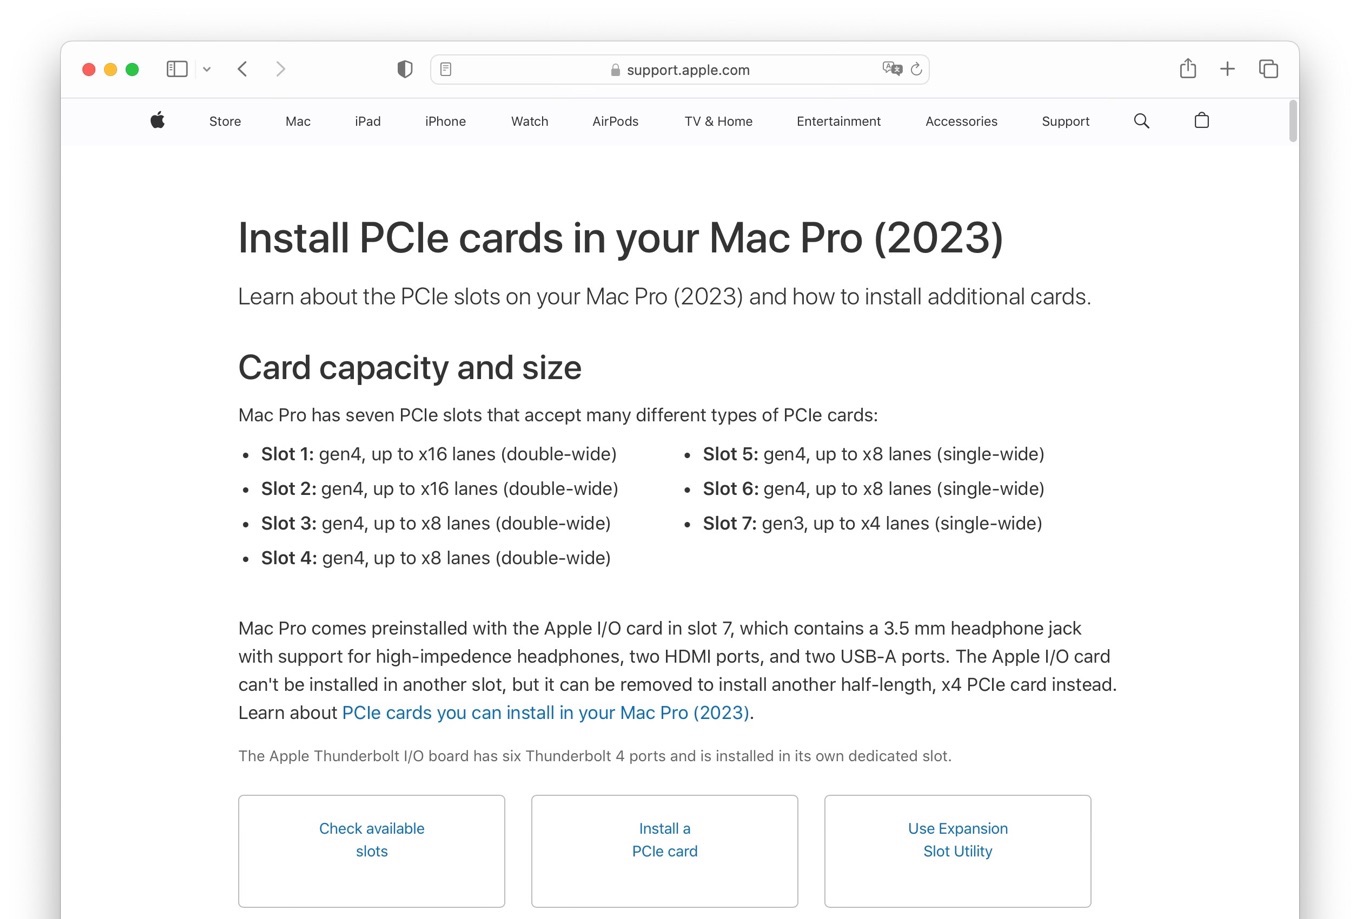 Install PCIe cards in your Mac Pro 2023